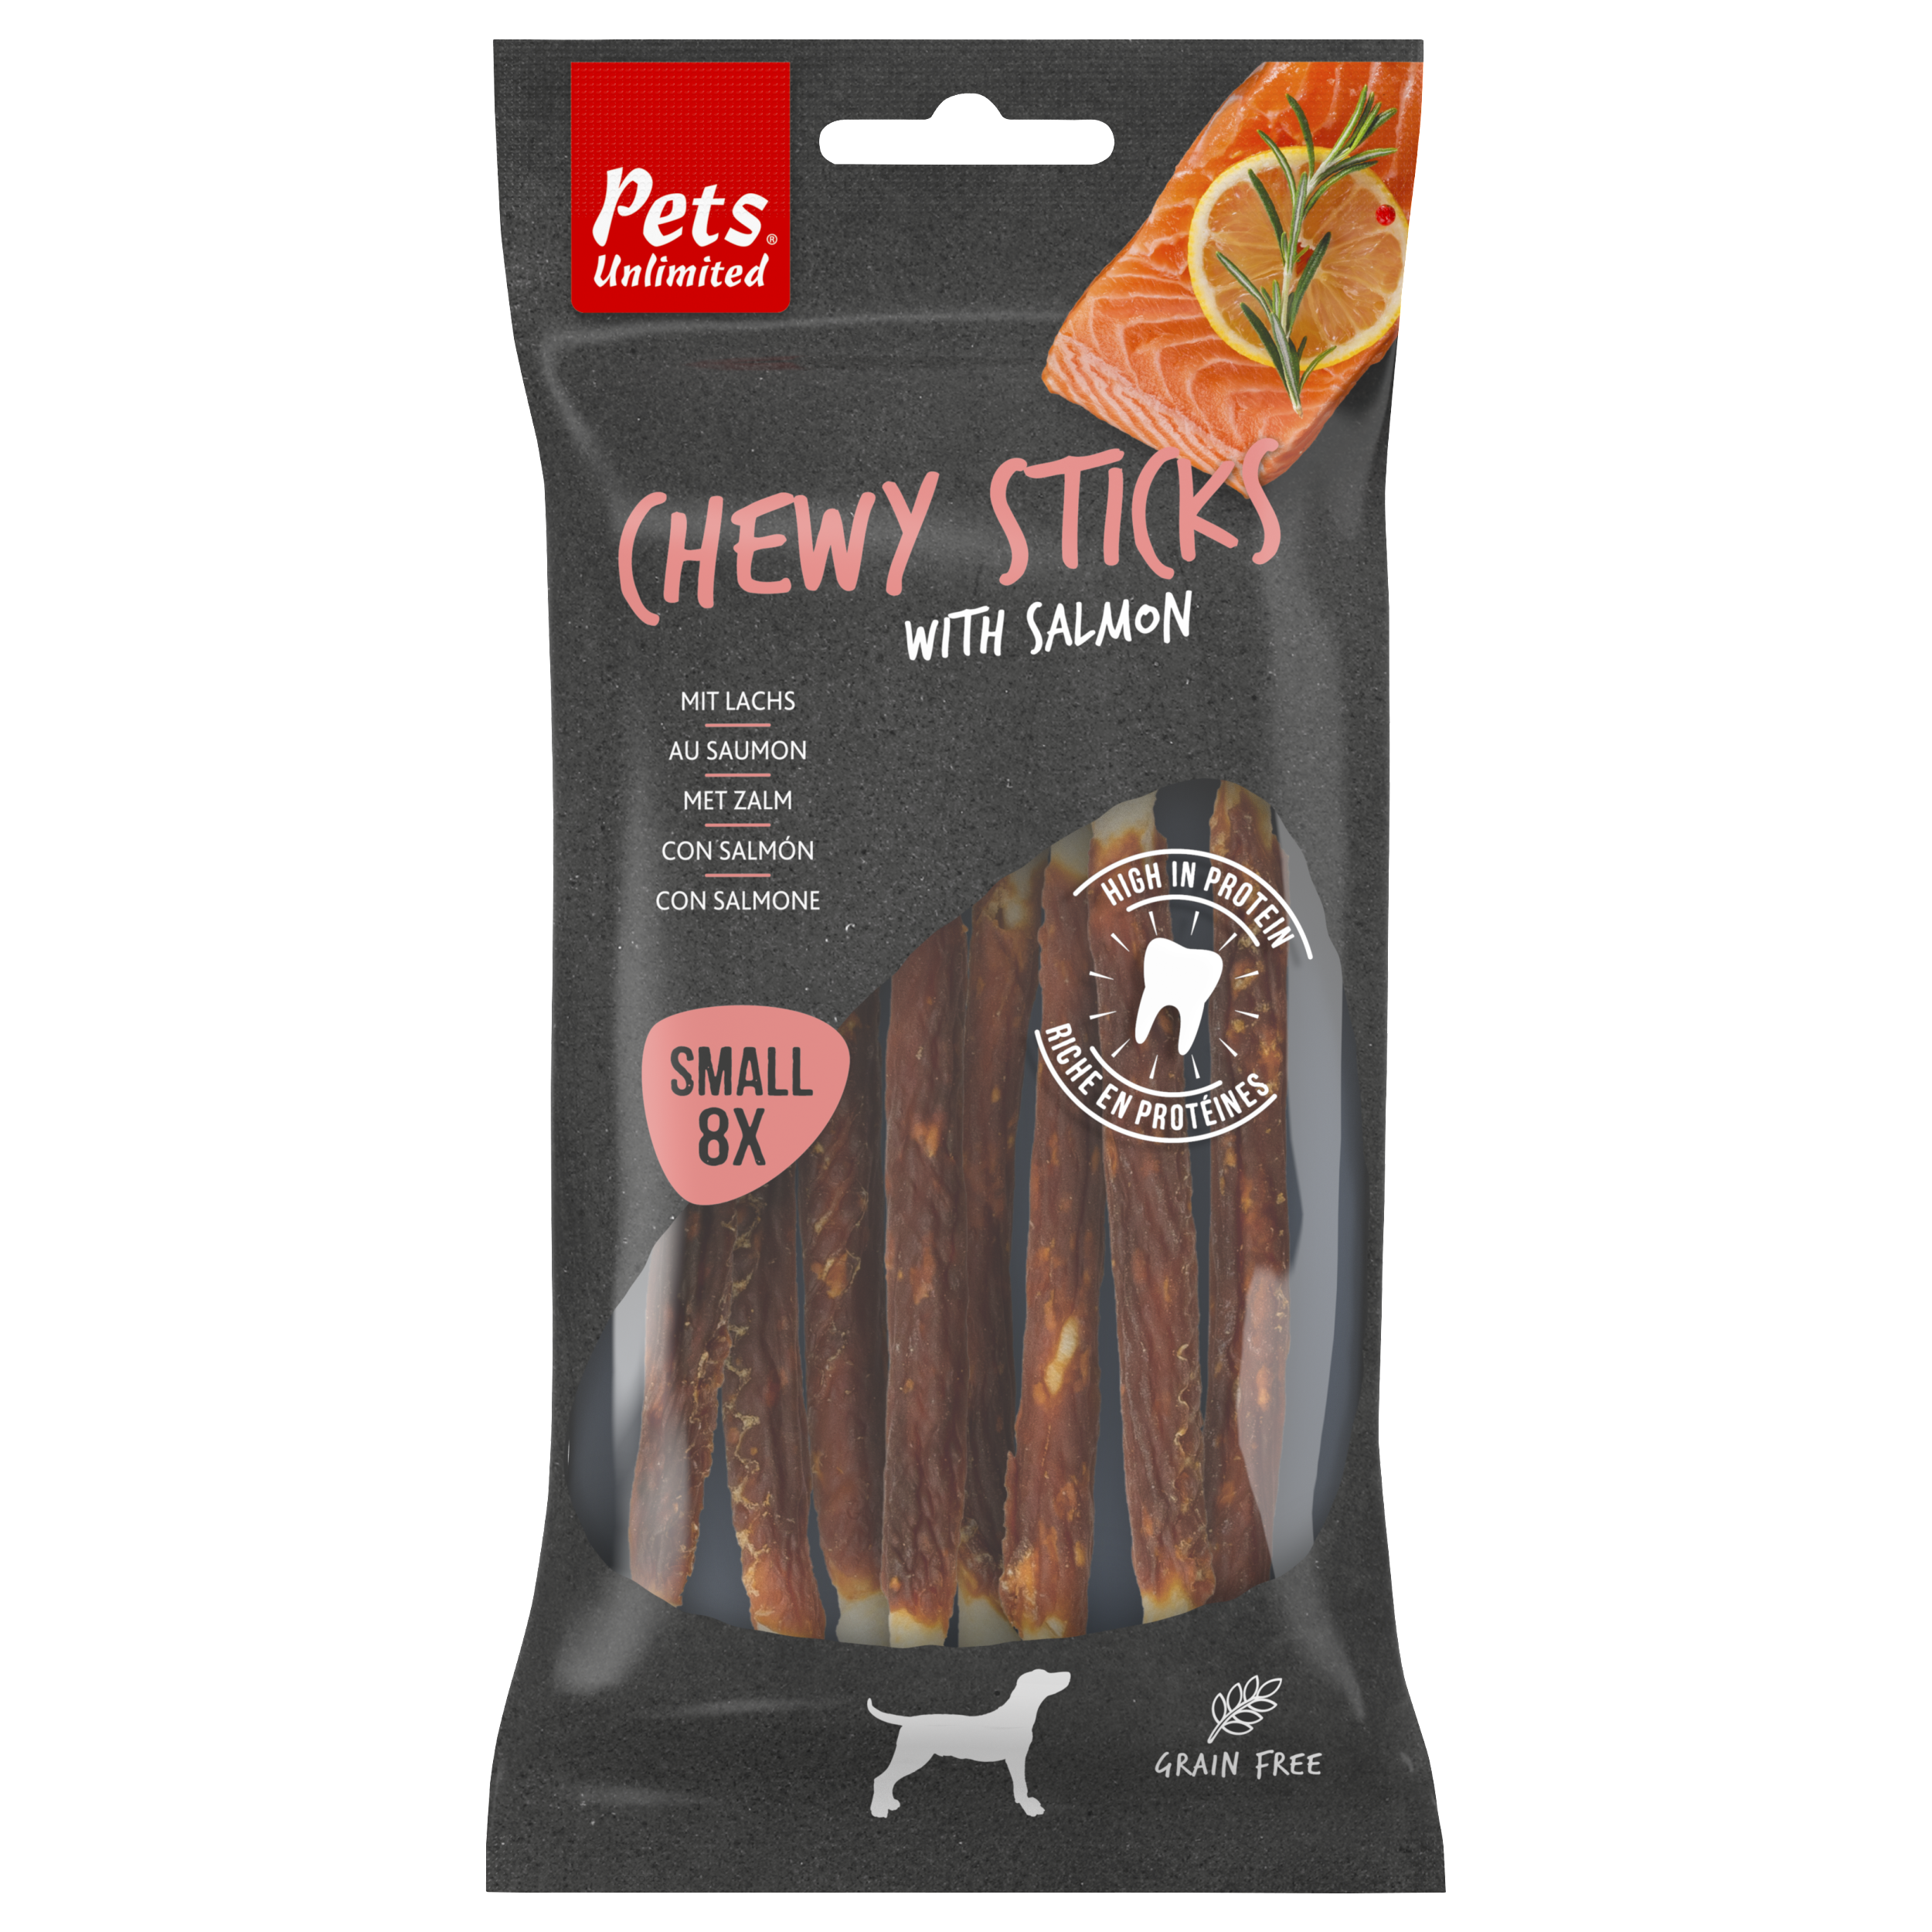 Chewy sticks with salmon small, 8 pieces